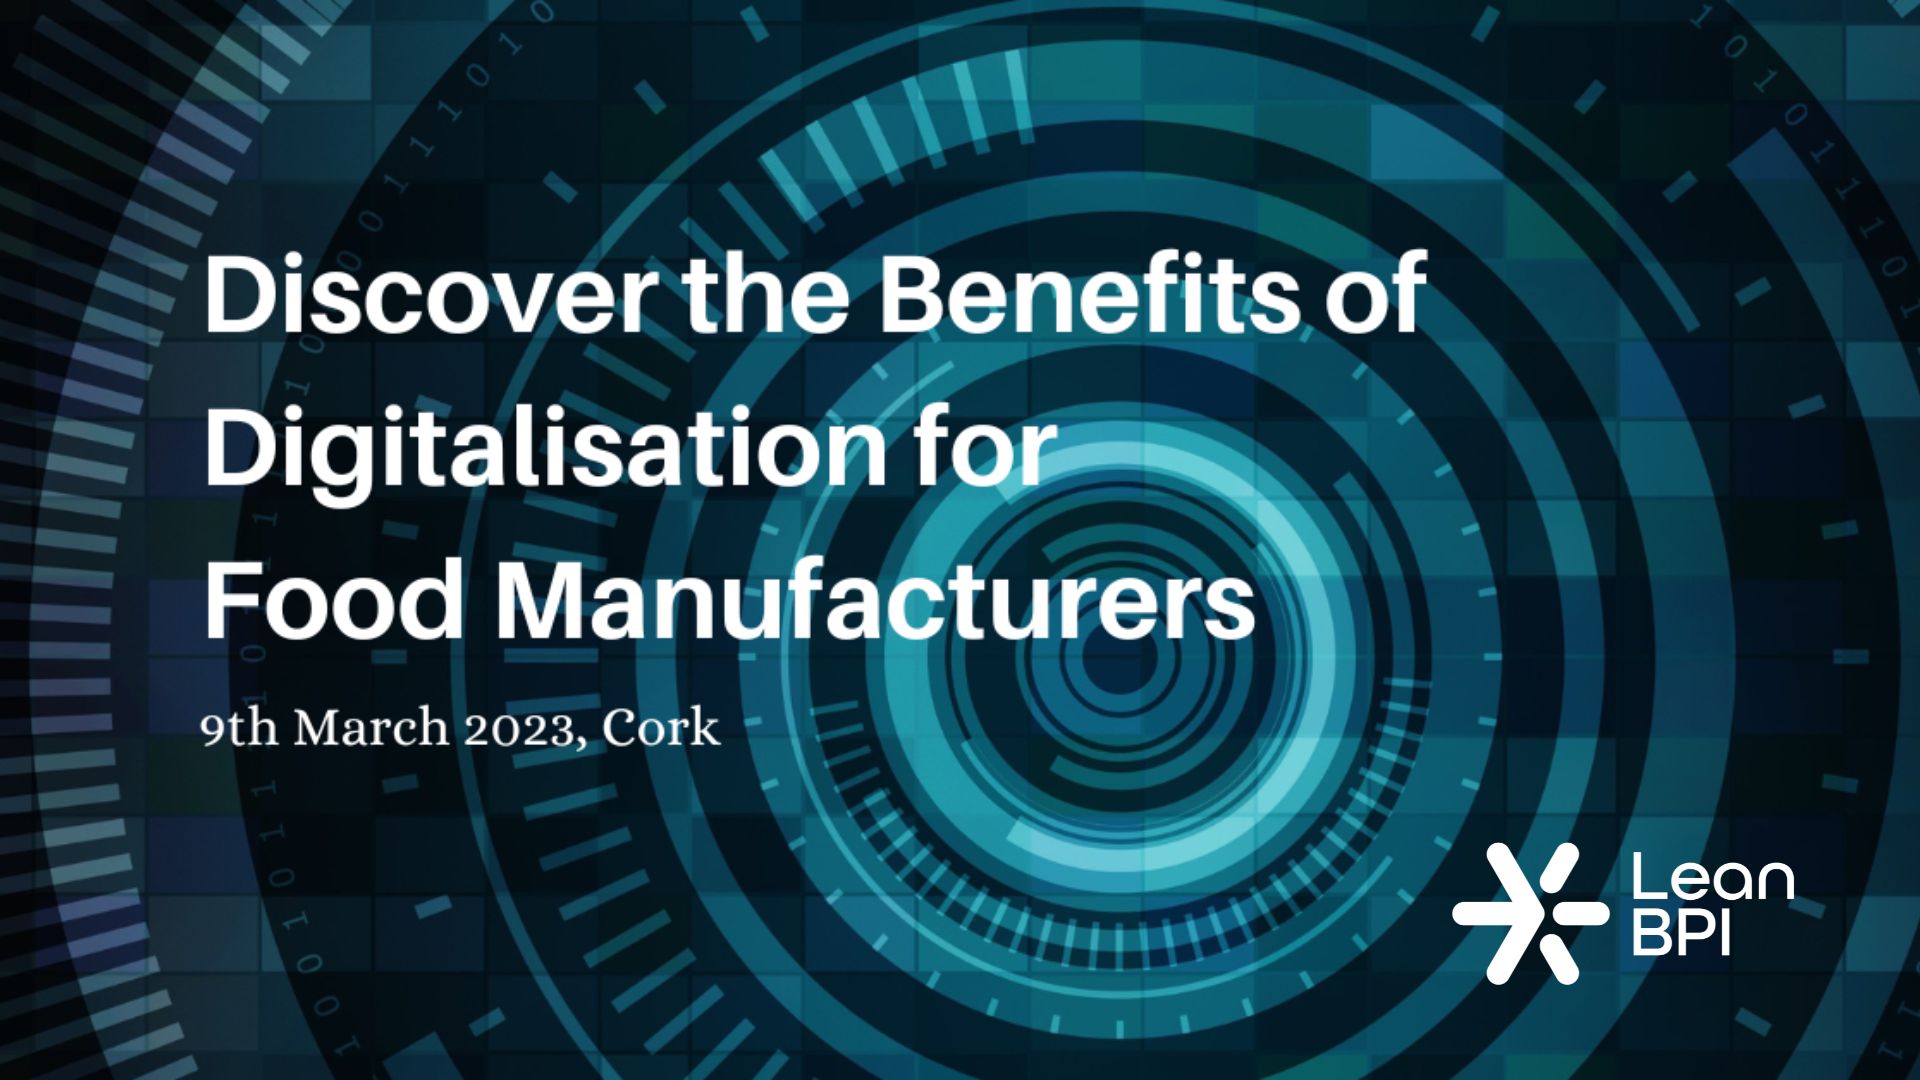 Discover the Benefits of Digitalisation for Food Manufacturers - Cork